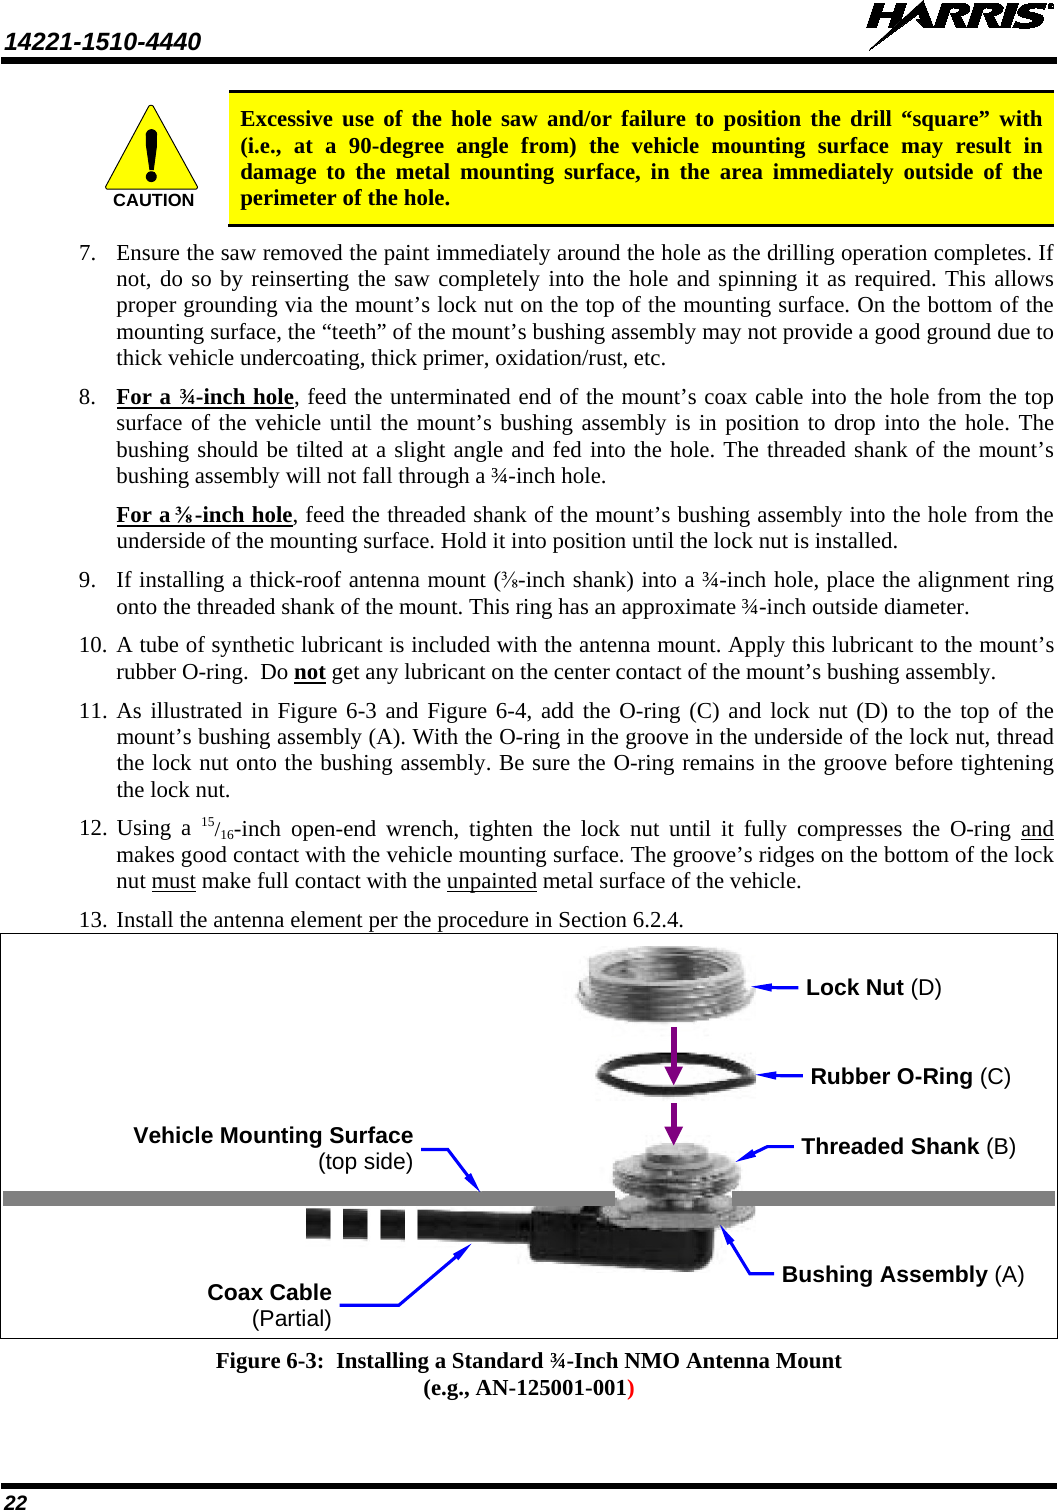 14221-1510-4440   22  Excessive use of the hole saw and/or failure to position the drill “square” with (i.e., at a 90-degree angle from) the vehicle mounting surface may result in damage to the metal mounting surface, in the area immediately outside of the perimeter of the hole. 7. Ensure the saw removed the paint immediately around the hole as the drilling operation completes. If not, do so by reinserting the saw completely into the hole and spinning it as required. This allows proper grounding via the mount’s lock nut on the top of the mounting surface. On the bottom of the mounting surface, the “teeth” of the mount’s bushing assembly may not provide a good ground due to thick vehicle undercoating, thick primer, oxidation/rust, etc. 8. For a ¾-inch hole, feed the unterminated end of the mount’s coax cable into the hole from the top surface of the vehicle until the mount’s bushing assembly is in position to drop into the hole. The bushing should be tilted at a slight angle and fed into the hole. The threaded shank of the mount’s bushing assembly will not fall through a ¾-inch hole. For a ⅜-inch hole, feed the threaded shank of the mount’s bushing assembly into the hole from the underside of the mounting surface. Hold it into position until the lock nut is installed. 9. If installing a thick-roof antenna mount (⅜-inch shank) into a ¾-inch hole, place the alignment ring onto the threaded shank of the mount. This ring has an approximate ¾-inch outside diameter. 10. A tube of synthetic lubricant is included with the antenna mount. Apply this lubricant to the mount’s rubber O-ring.  Do not get any lubricant on the center contact of the mount’s bushing assembly. 11. As illustrated in Figure 6-3 and Figure 6-4, add the O-ring (C) and lock nut (D) to the top of the mount’s bushing assembly (A). With the O-ring in the groove in the underside of the lock nut, thread the lock nut onto the bushing assembly. Be sure the O-ring remains in the groove before tightening the lock nut. 12. Using a 15/16-inch open-end wrench, tighten the lock nut until it fully compresses the O-ring  and makes good contact with the vehicle mounting surface. The groove’s ridges on the bottom of the lock nut must make full contact with the unpainted metal surface of the vehicle. 13. Install the antenna element per the procedure in Section 6.2.4.    Figure 6-3:  Installing a Standard ¾-Inch NMO Antenna Mount (e.g., AN-125001-001)  CAUTIONCoax Cable (Partial) Rubber O-Ring (C) Vehicle Mounting Surface (top side) Bushing Assembly (A) Lock Nut (D) Threaded Shank (B) 